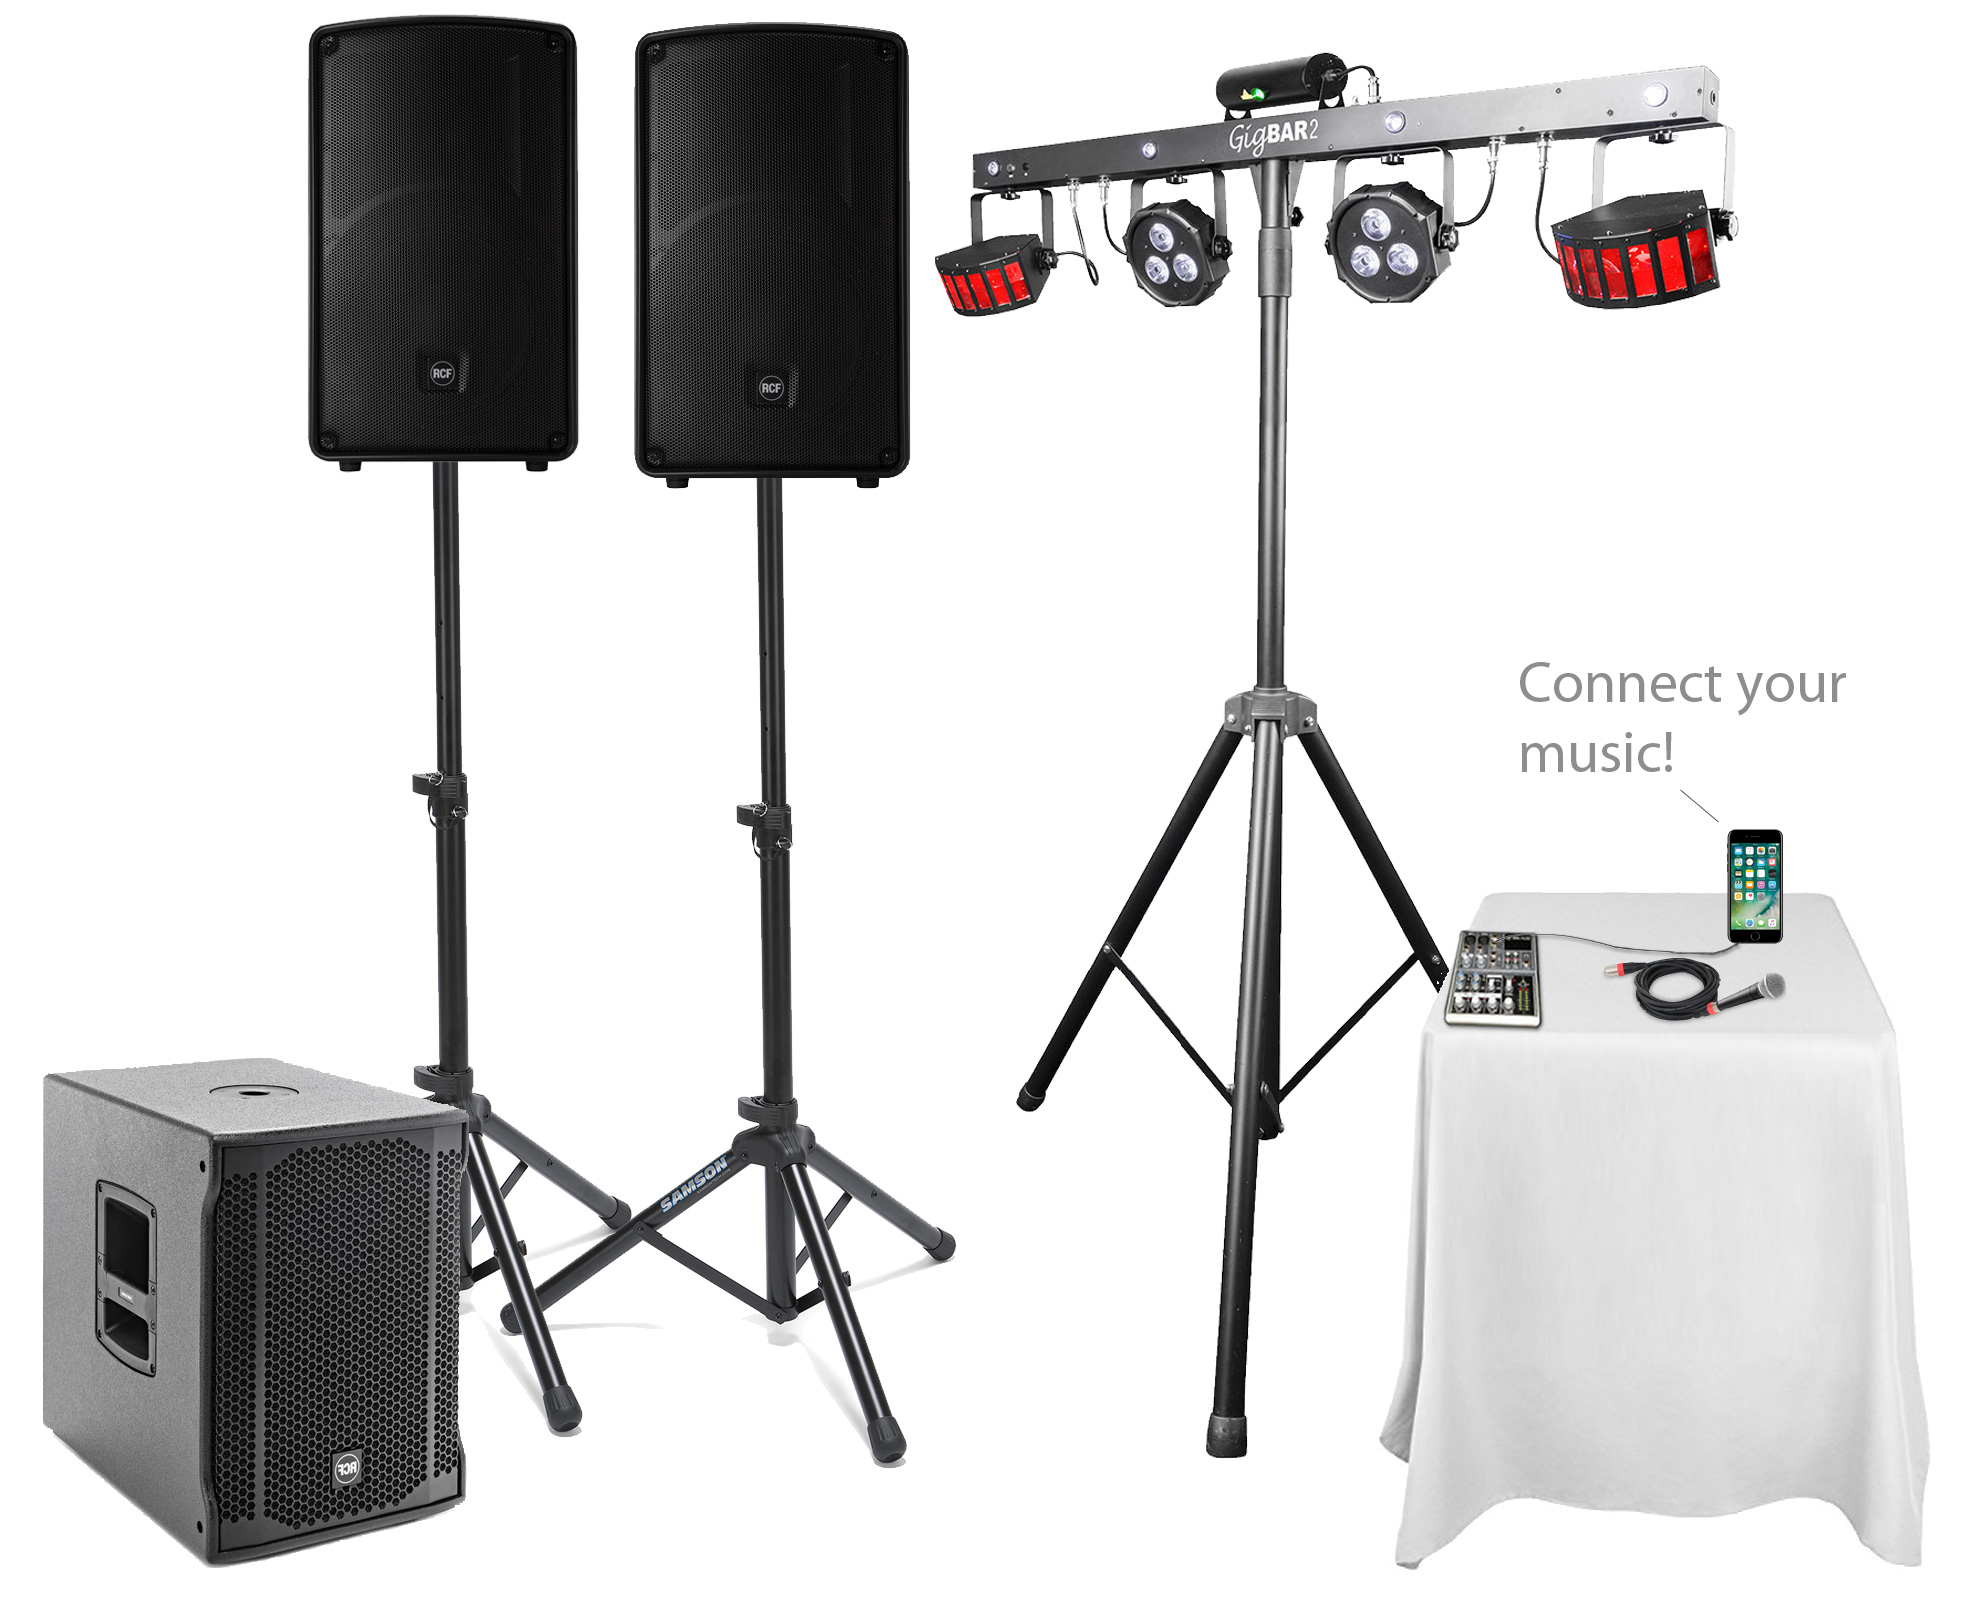 sydney wedding pa hire - our wedding recption pa system